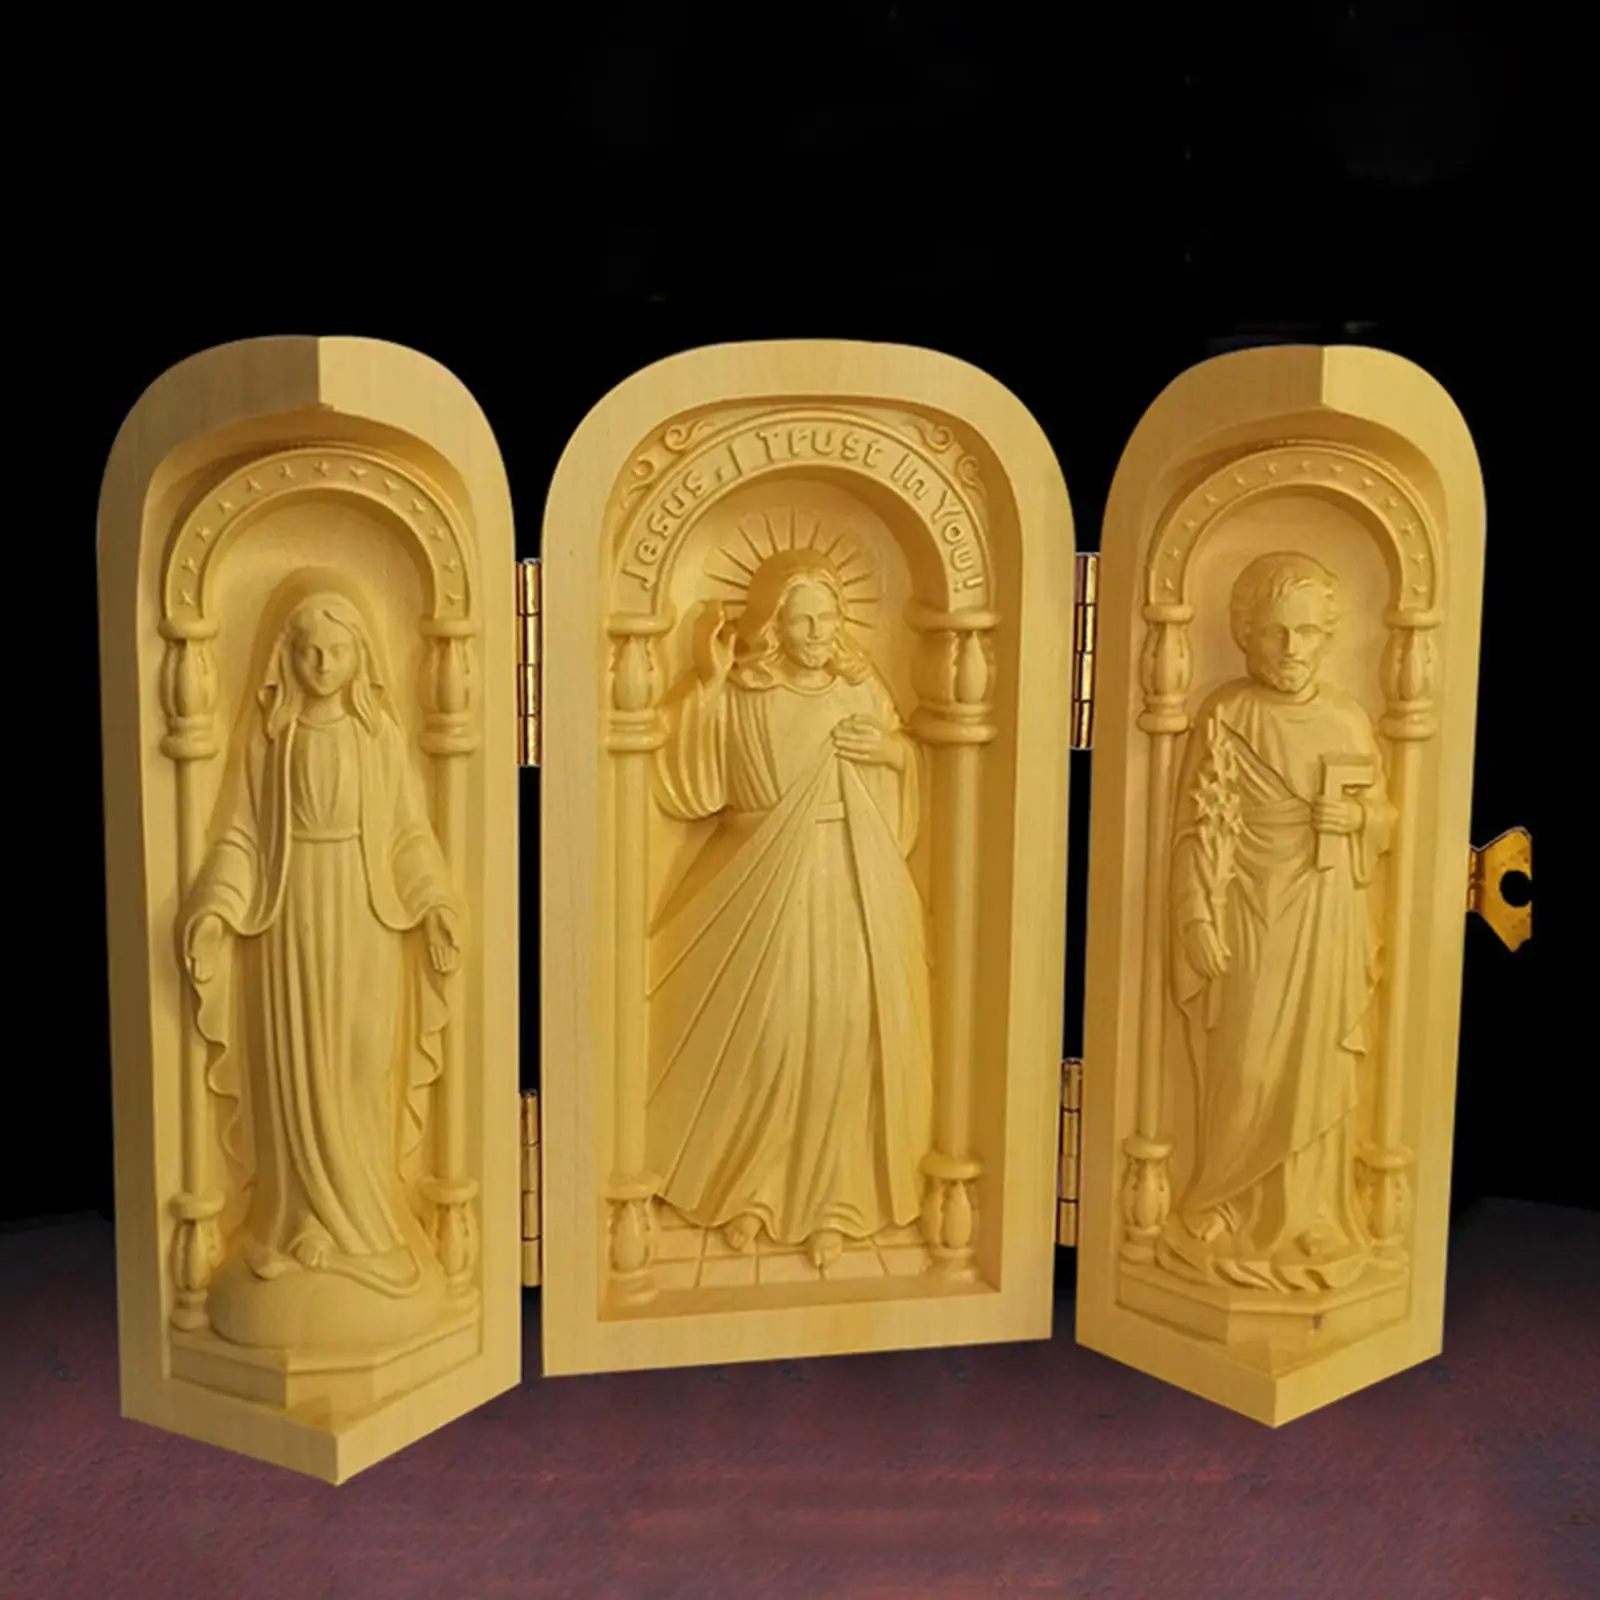 Wood Carving Ornaments Small Catholic Religious Ornament Sculpture Catholic Relics for Table Home Bedroom Office Catholic